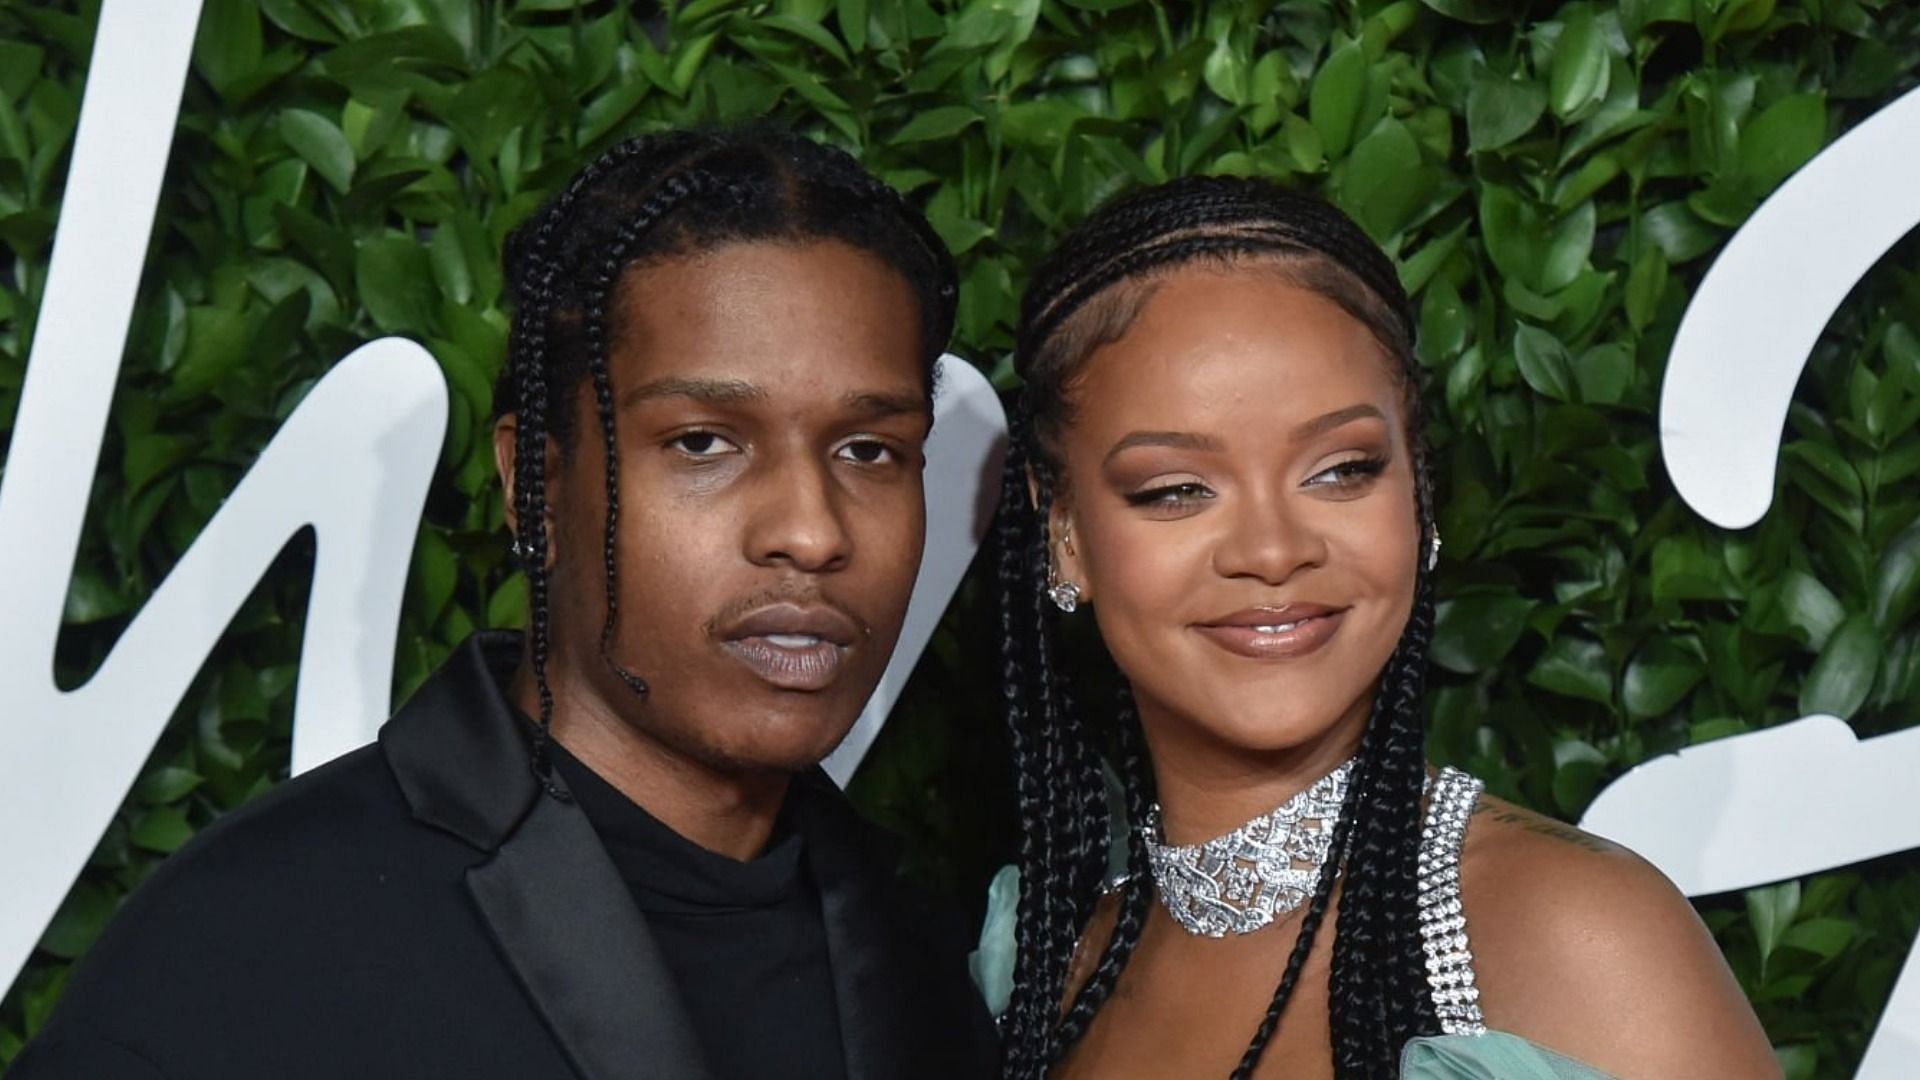 Are Rihanna and ASAP Rocky still together? Source vehemently denies ...